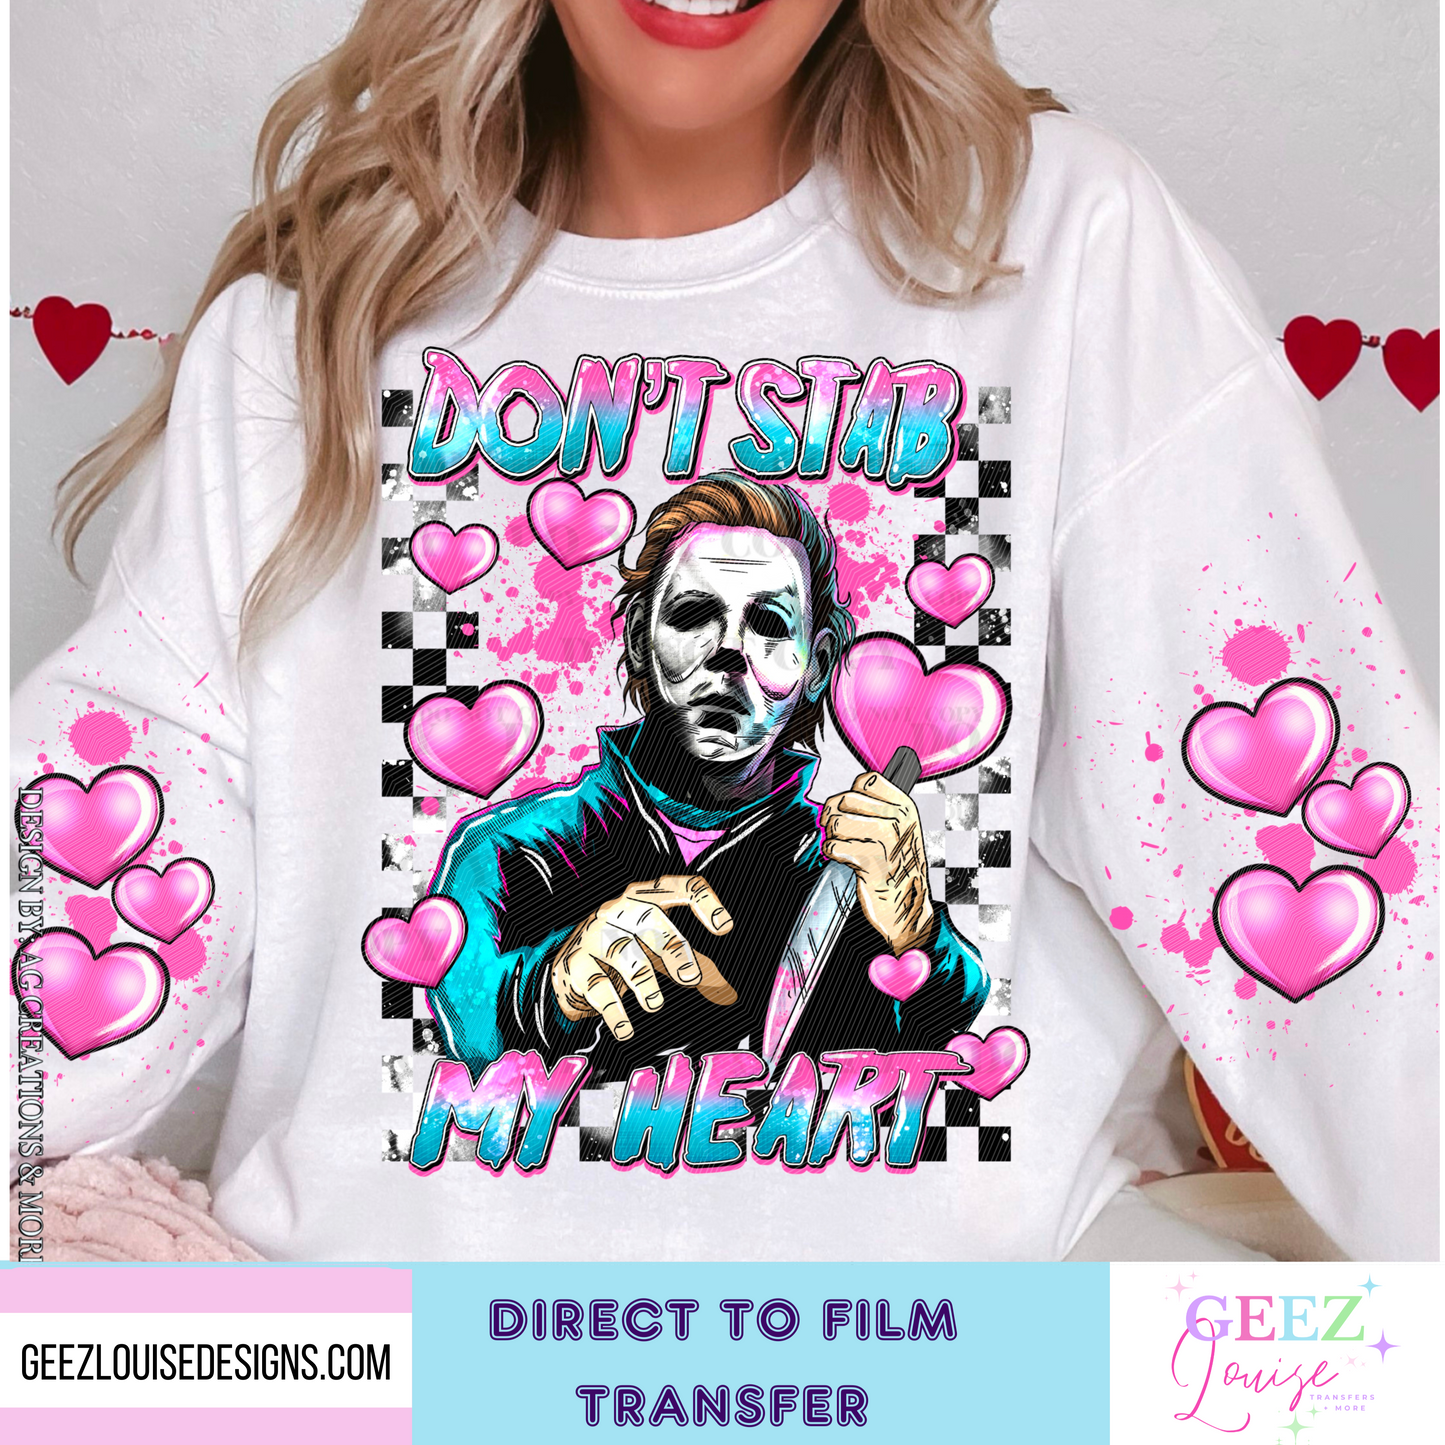 Don't stab my heart - Direct to Film Transfer - made to order